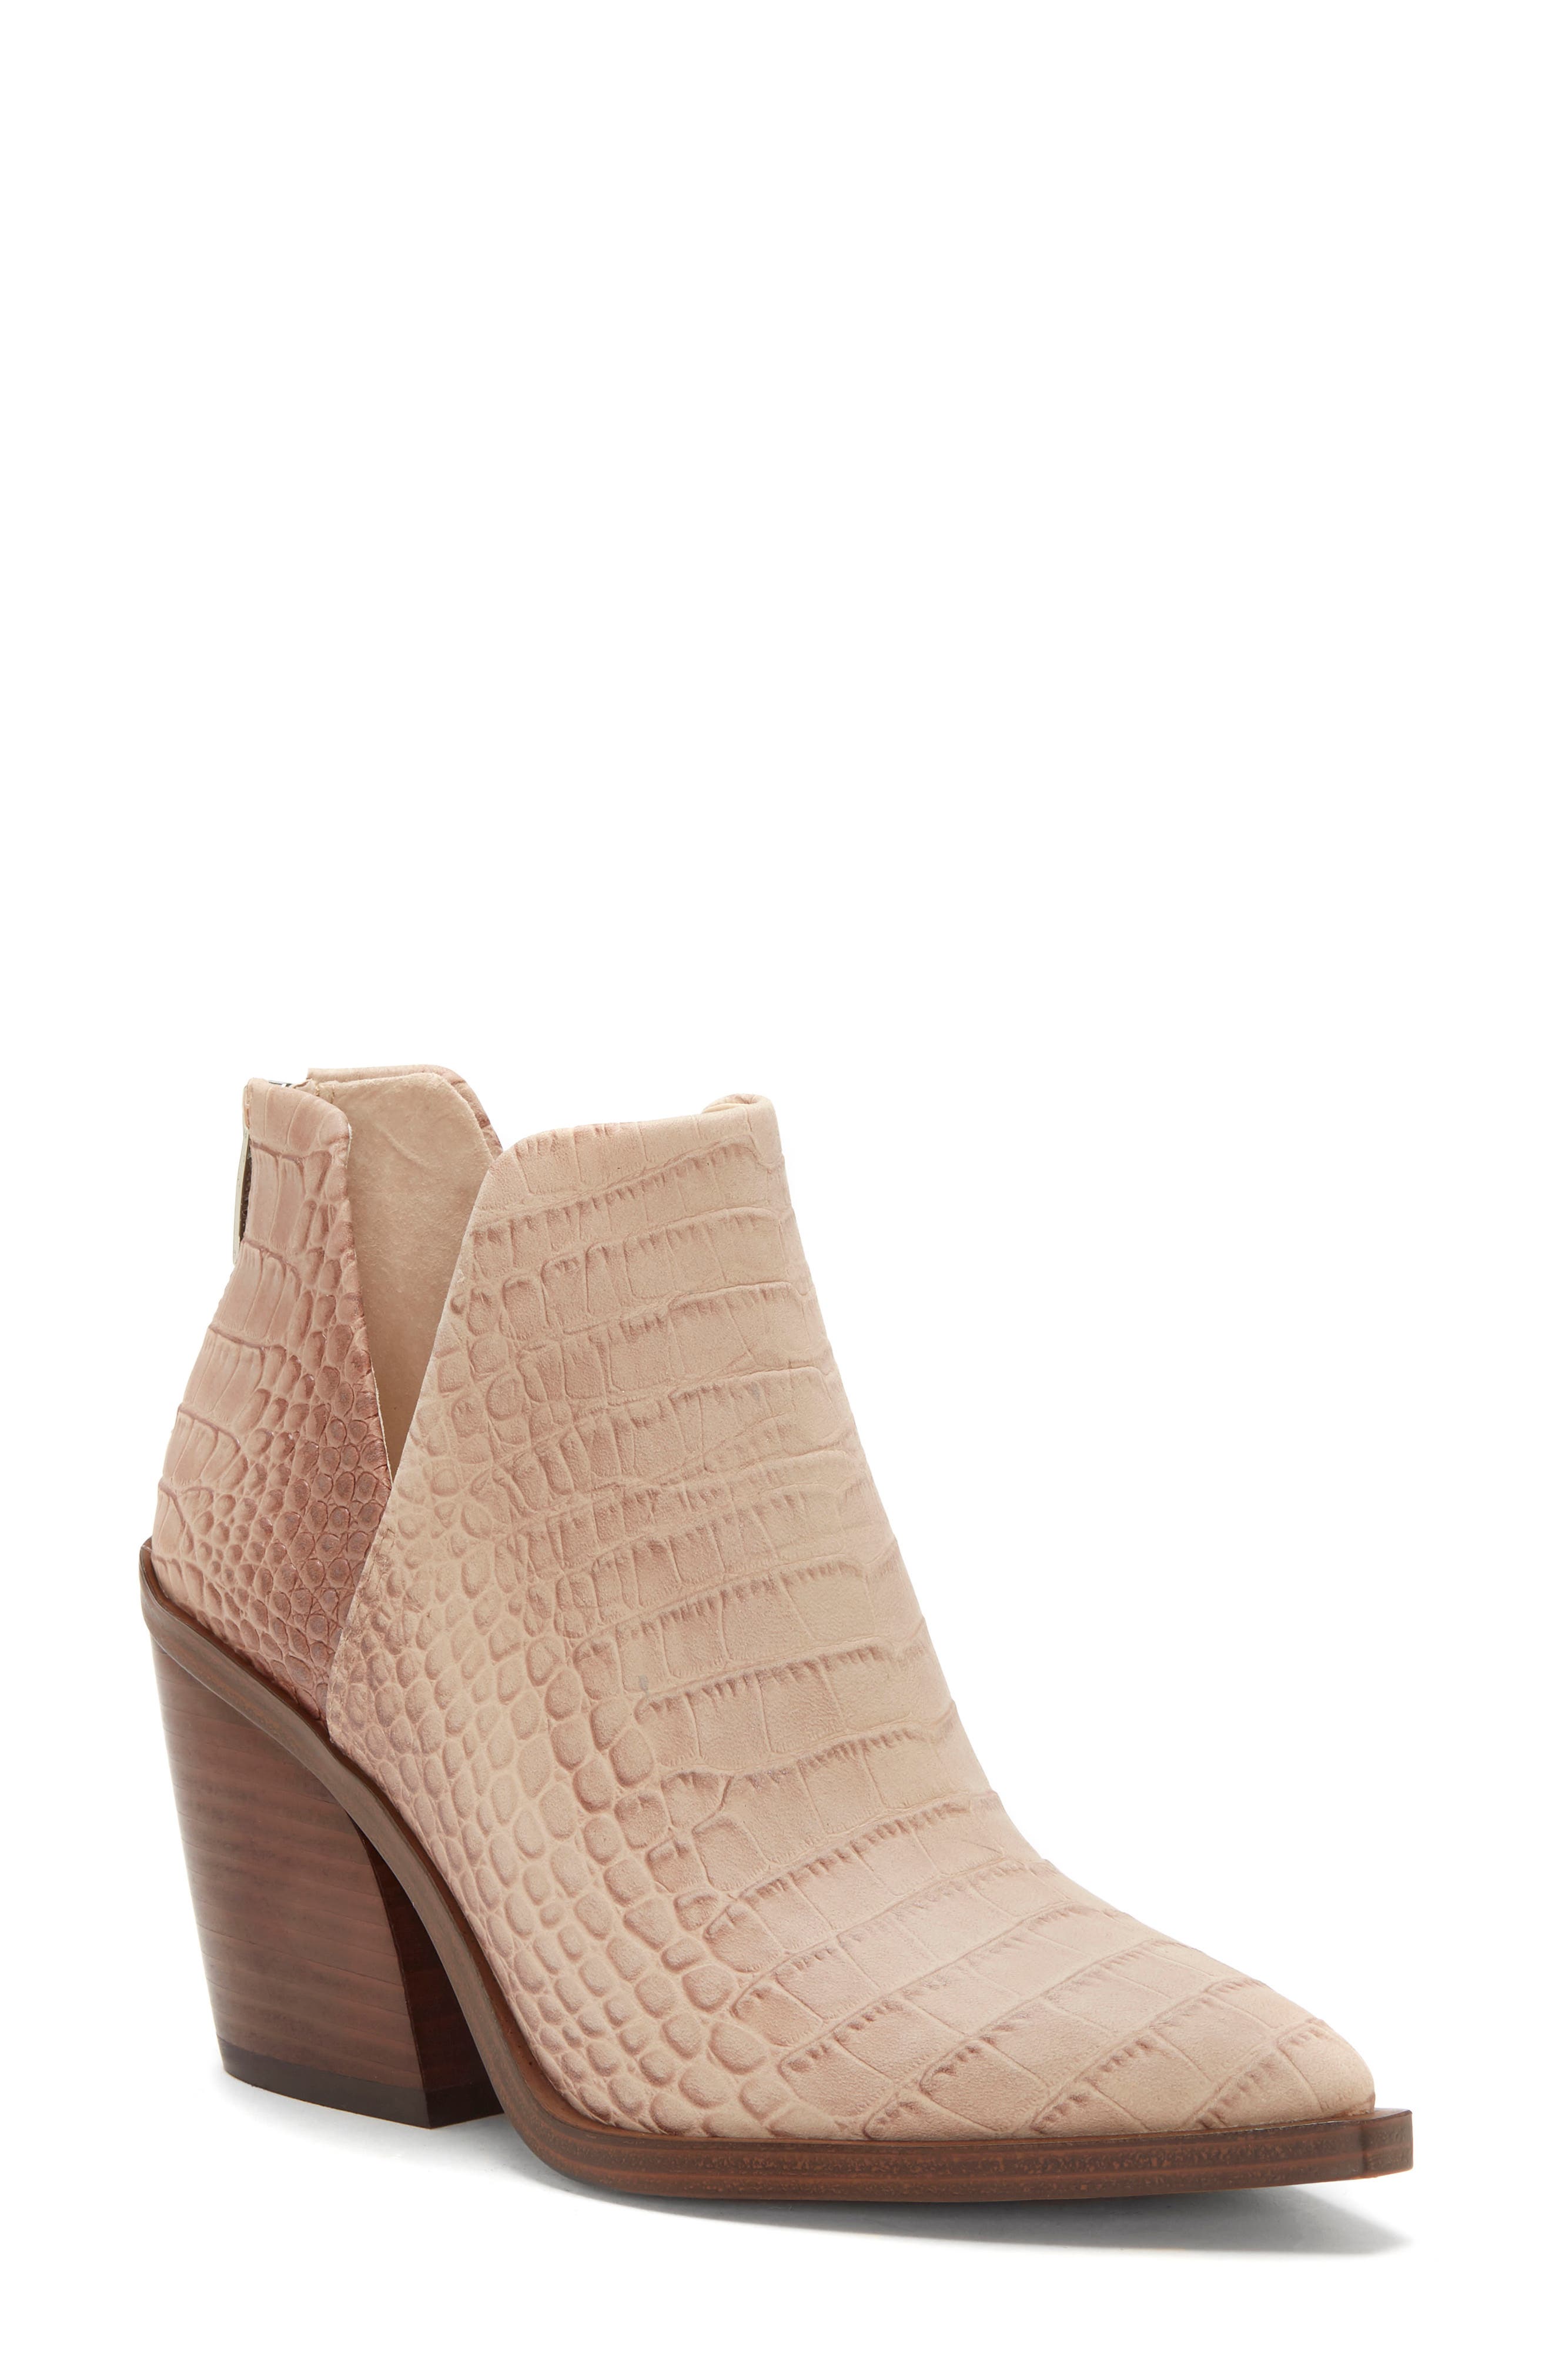 nordstrom womens boots